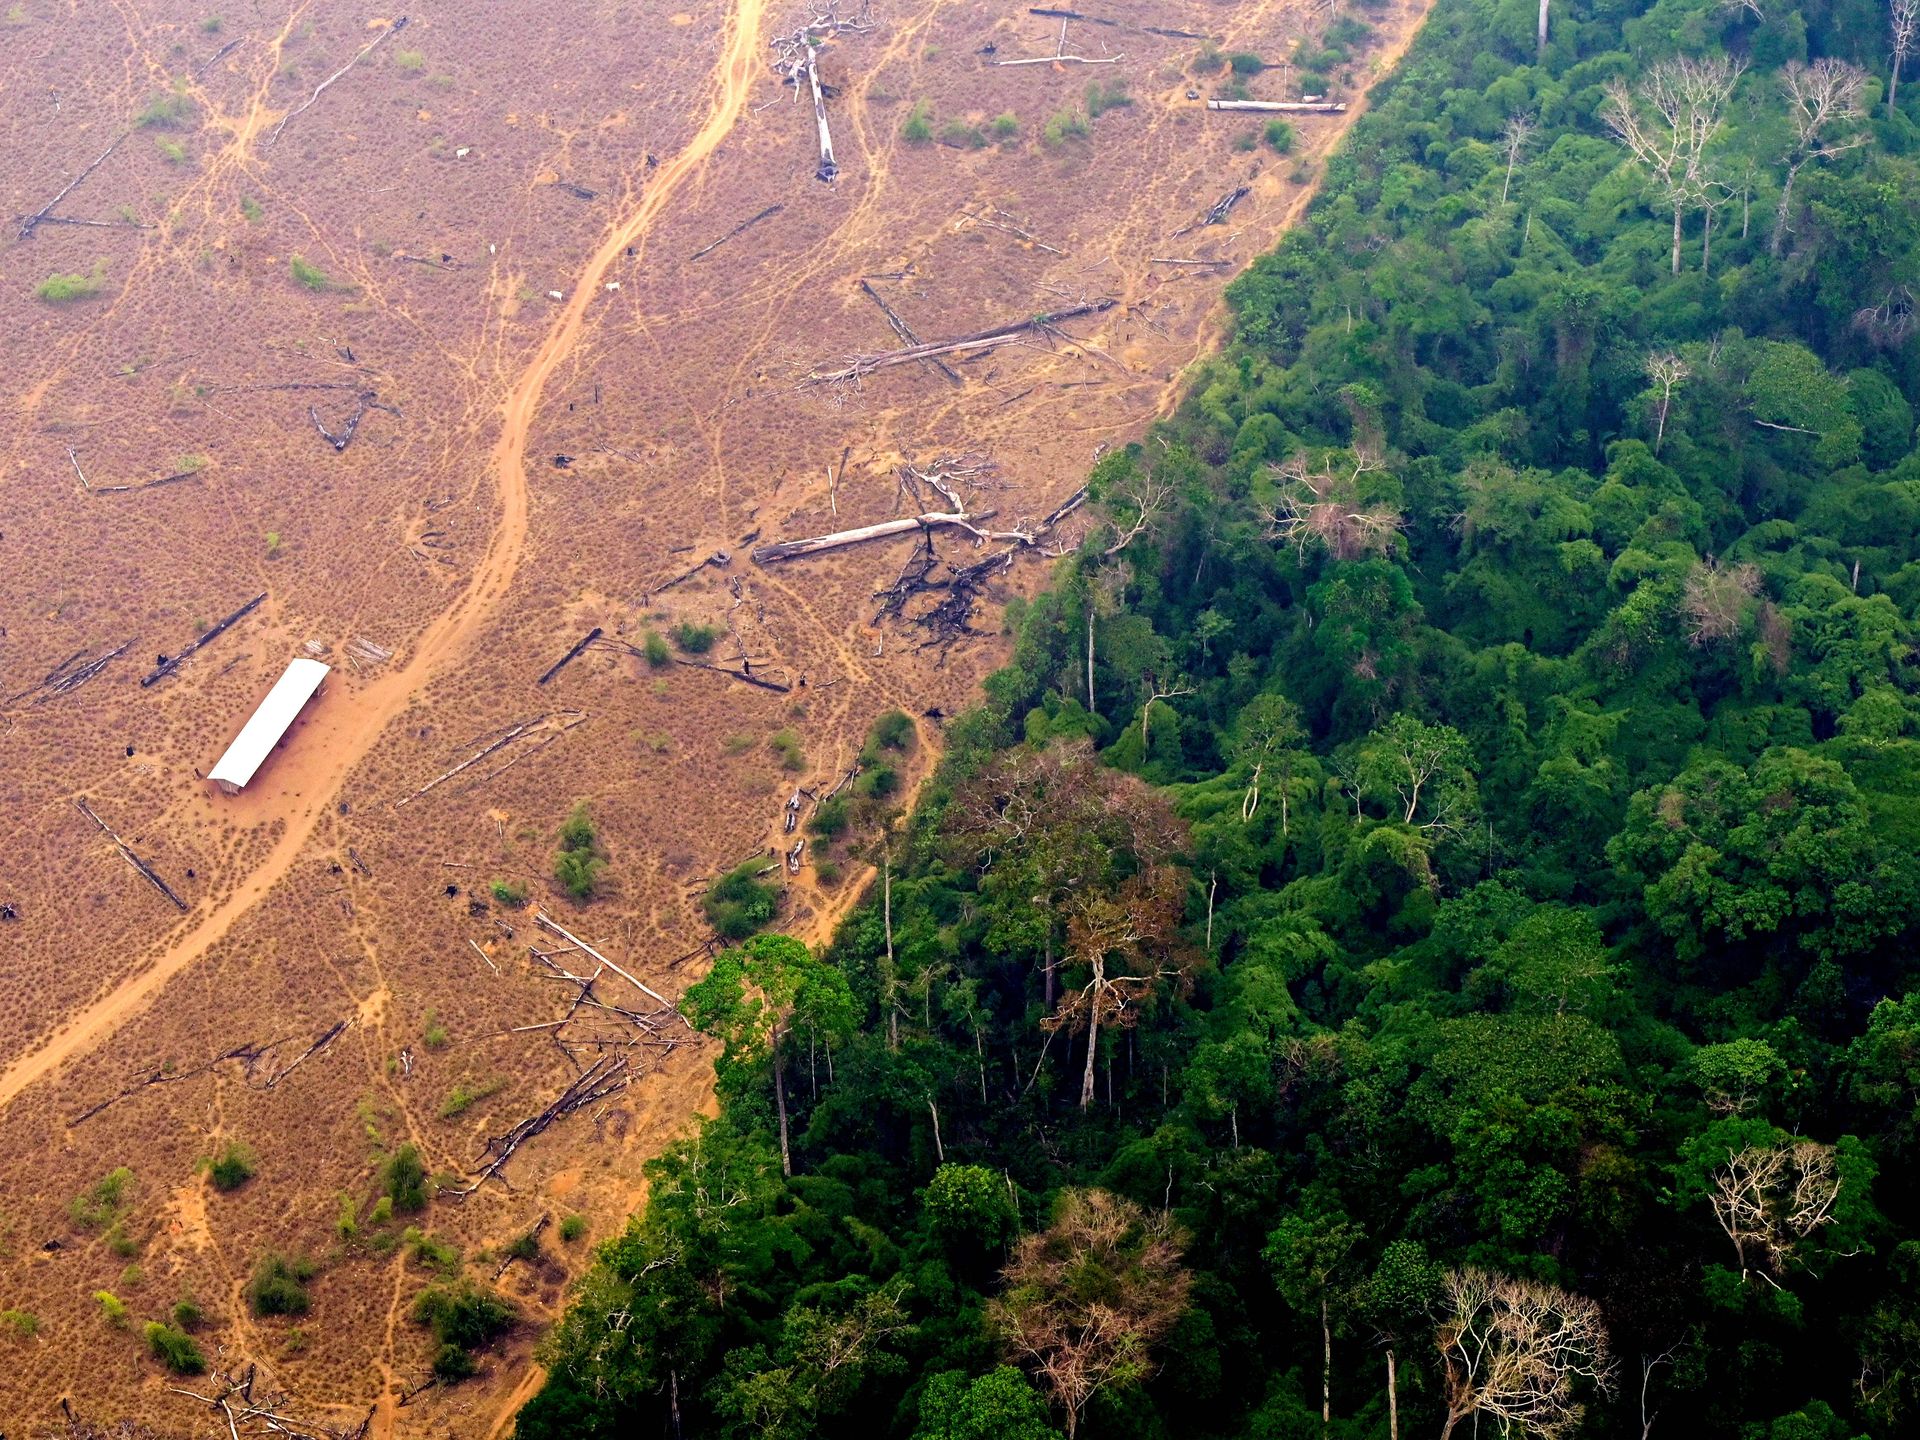 amazon rainforest deforestation before and after